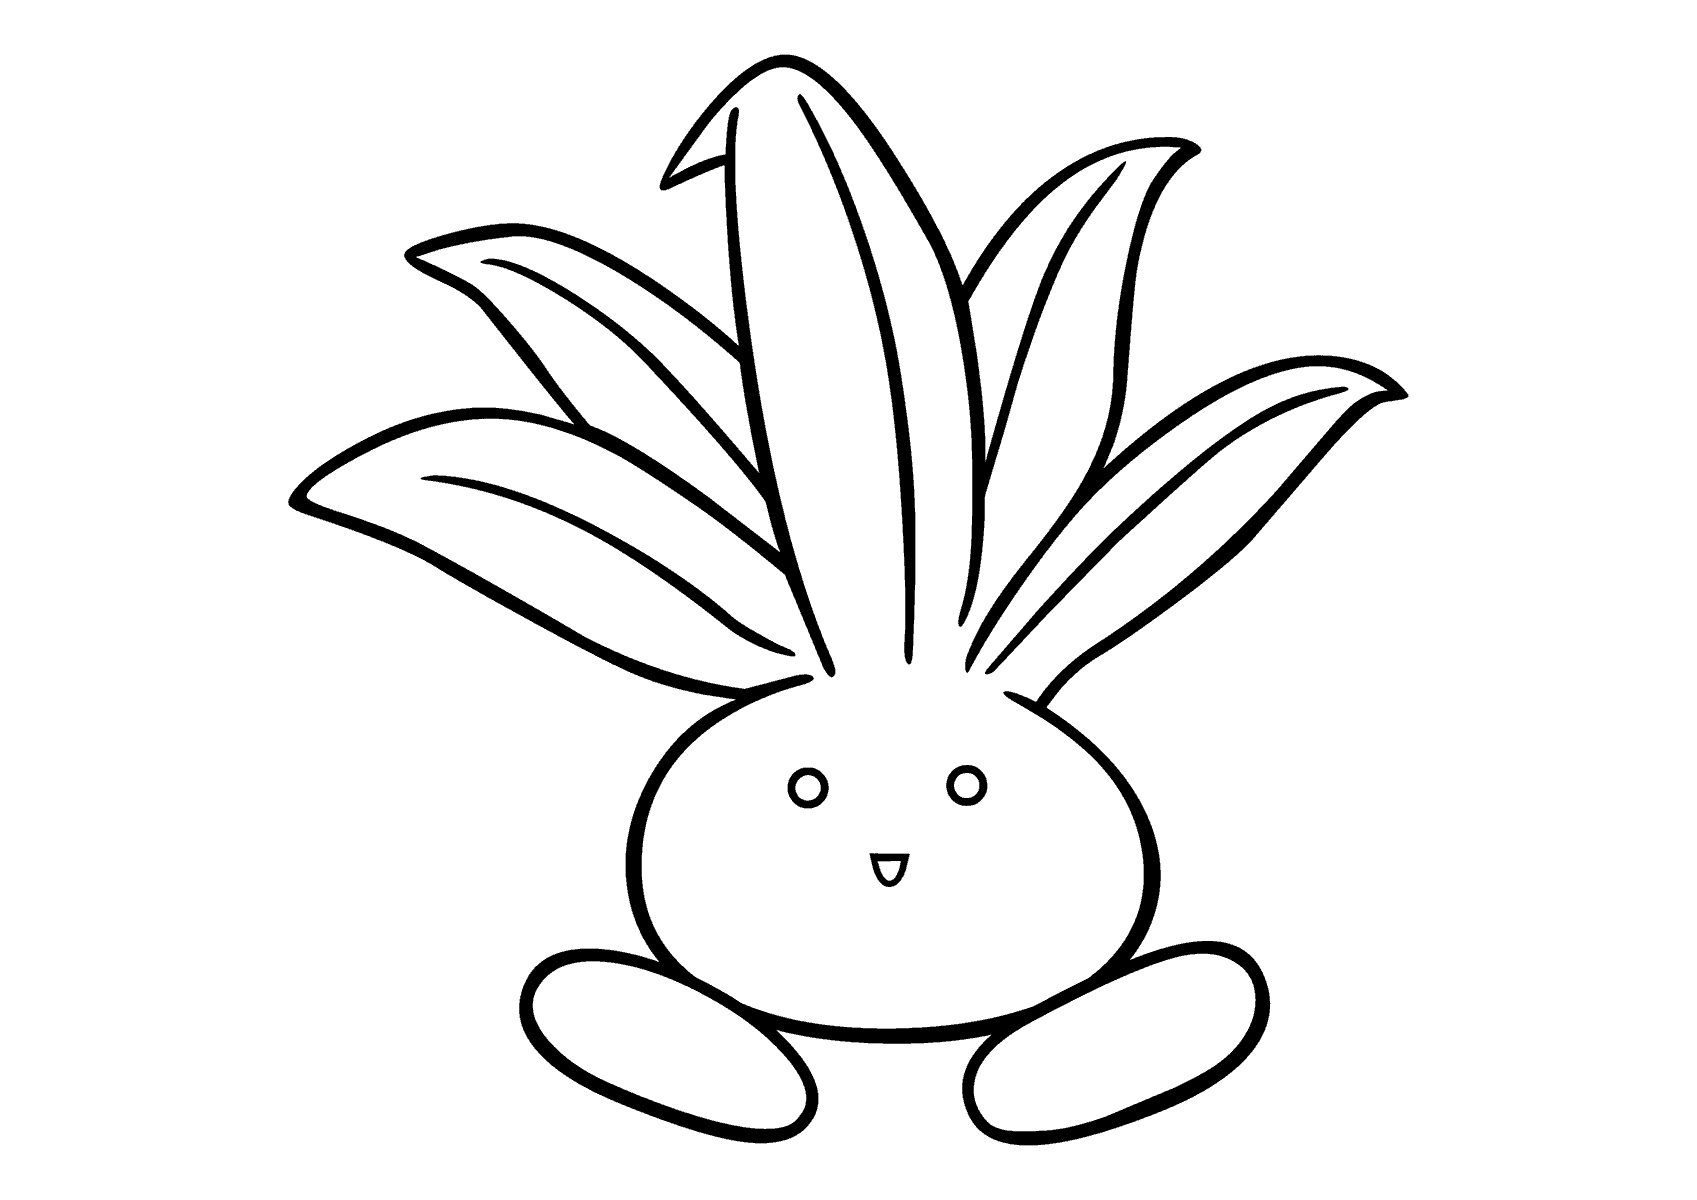 coloring page: Pokémon said to have come from another world w/ glossy eyes, long legs, & leaf head. Active after sunset.